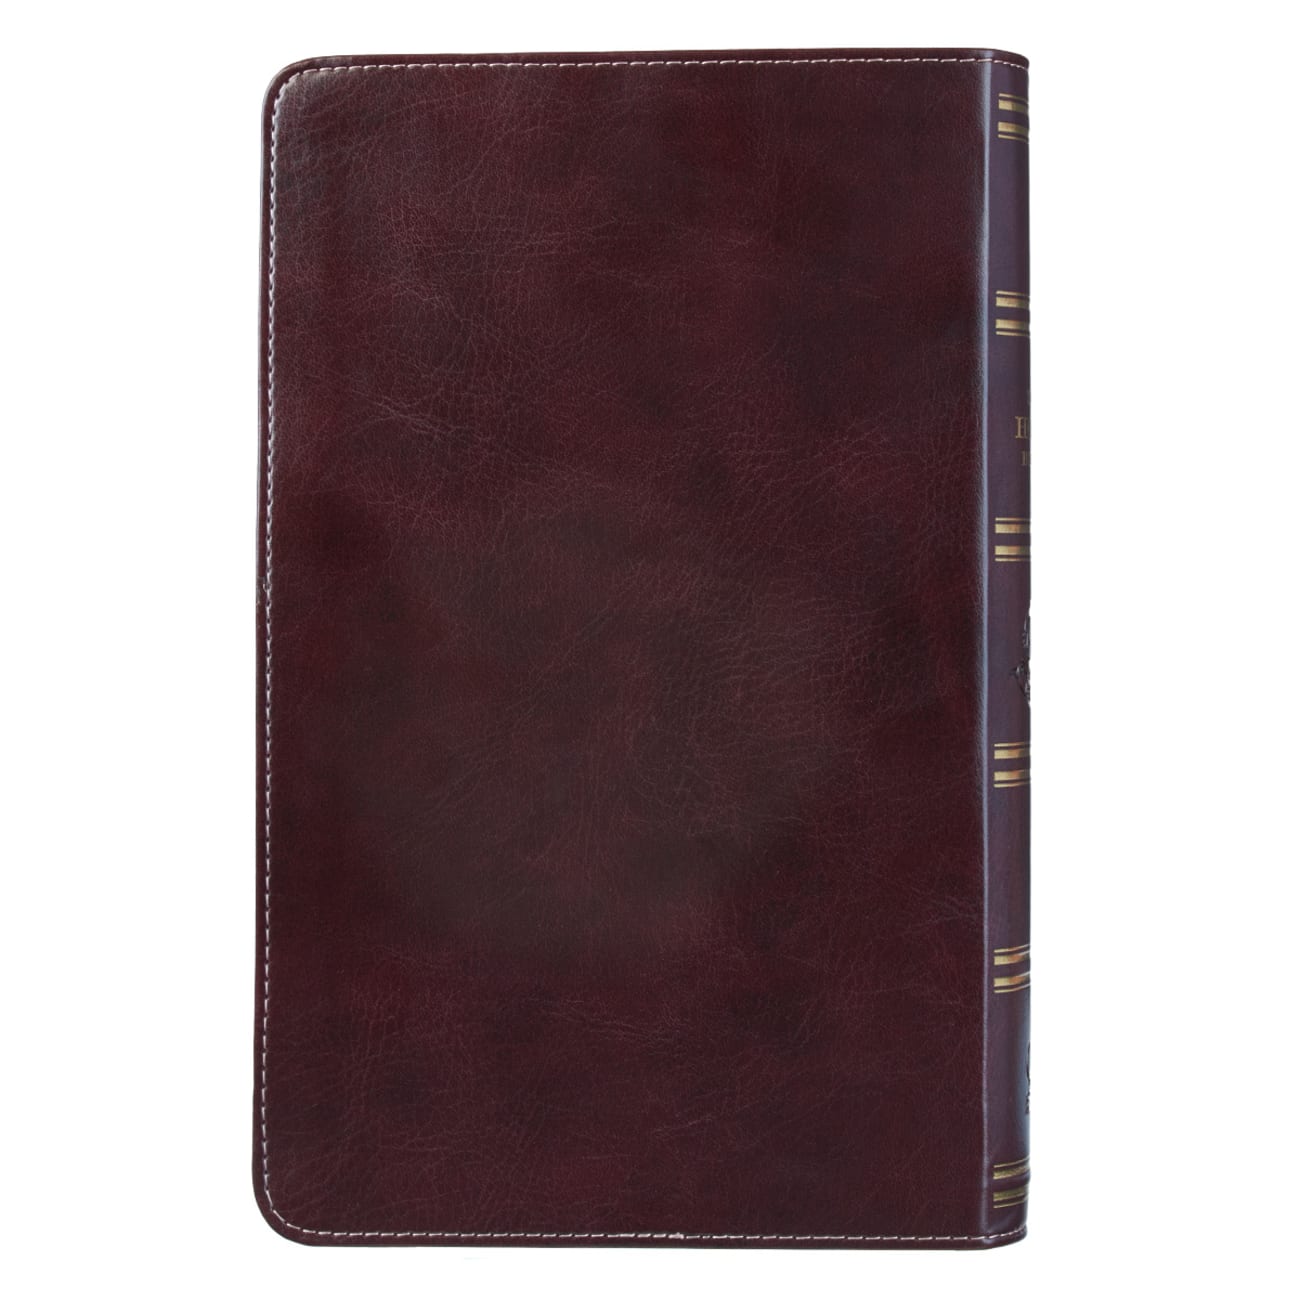 KJV Giant Print Bible Pink/Brown Red Letter Edition Imitation Leather